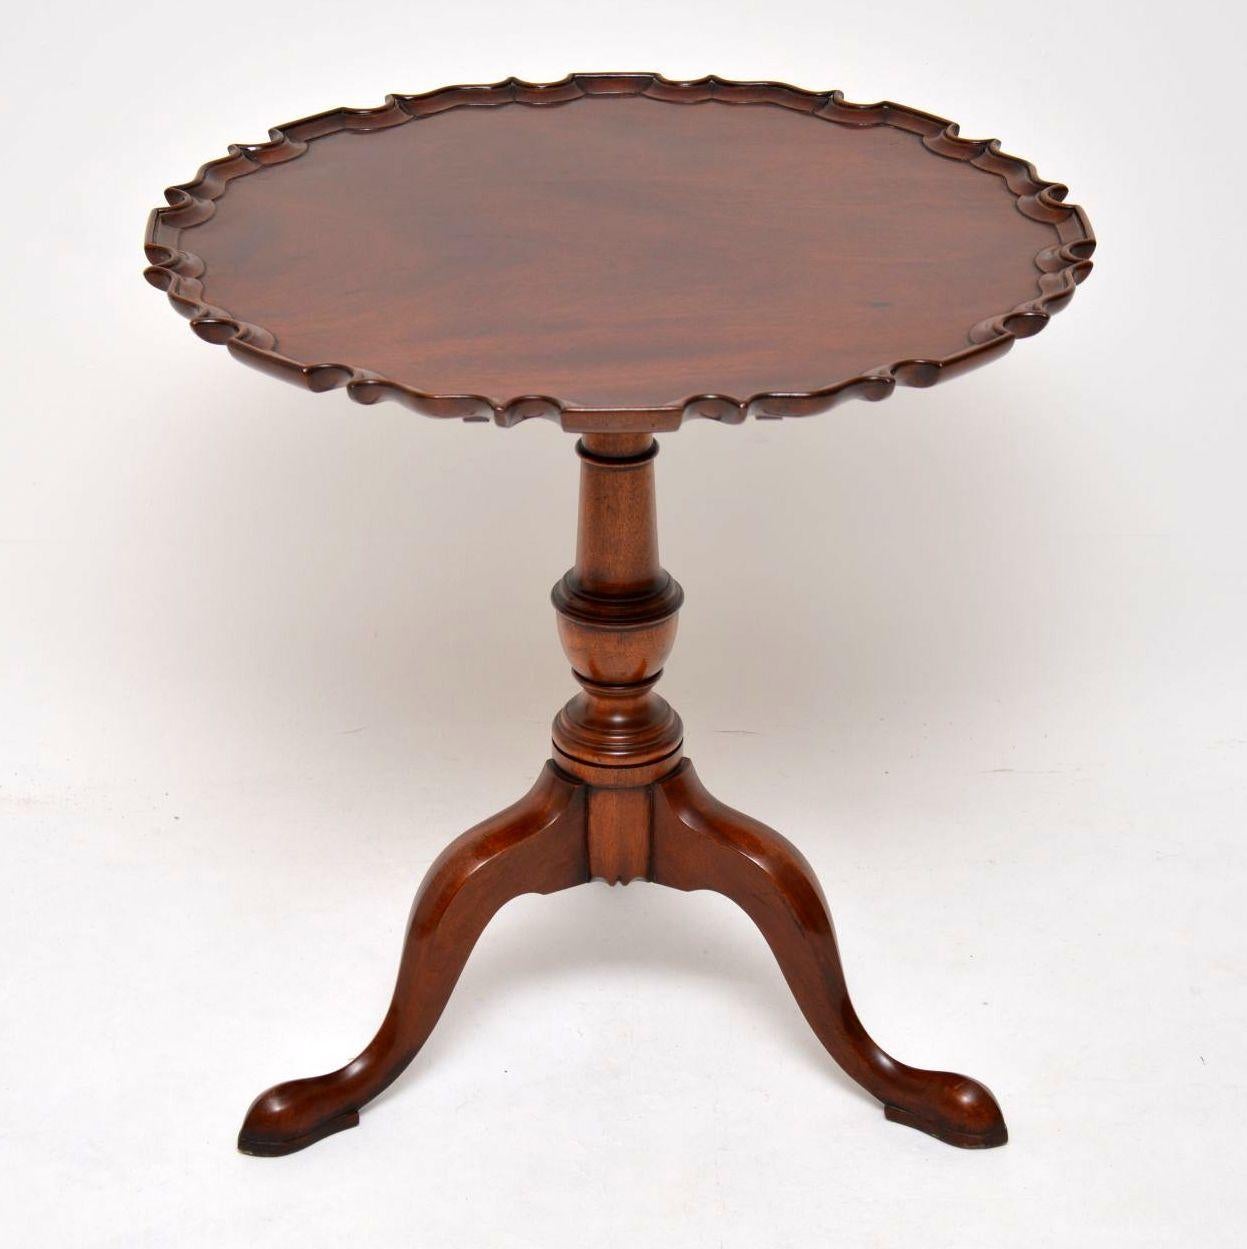 Fine quality antique George III style solid mahogany tilt-top table in lovely condition and dating to circa 1950s period. It has a solid mahogany top, a shaped pie crust edge and sits on a well turned baluster pedestal on tripod pad feet. The turned